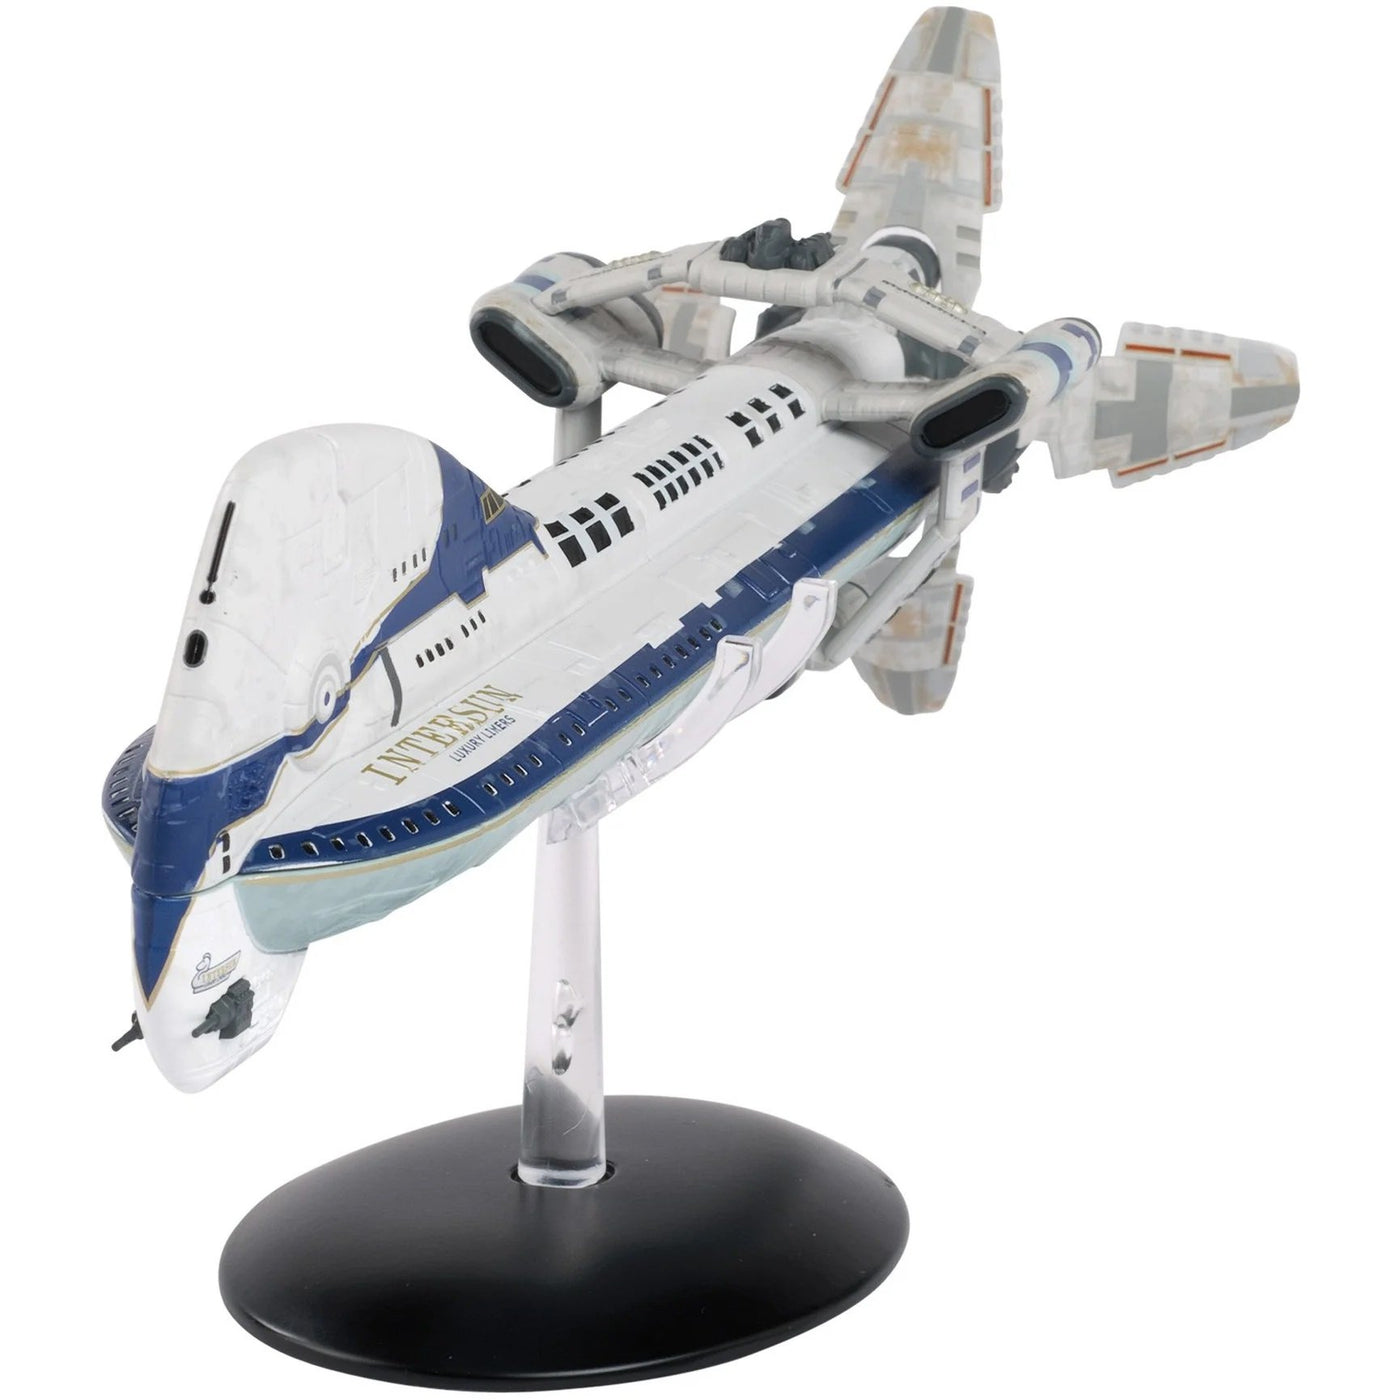 Hero Collector Battlestar Galactica Ships Collection - Colonial One with Magazine Issue 13